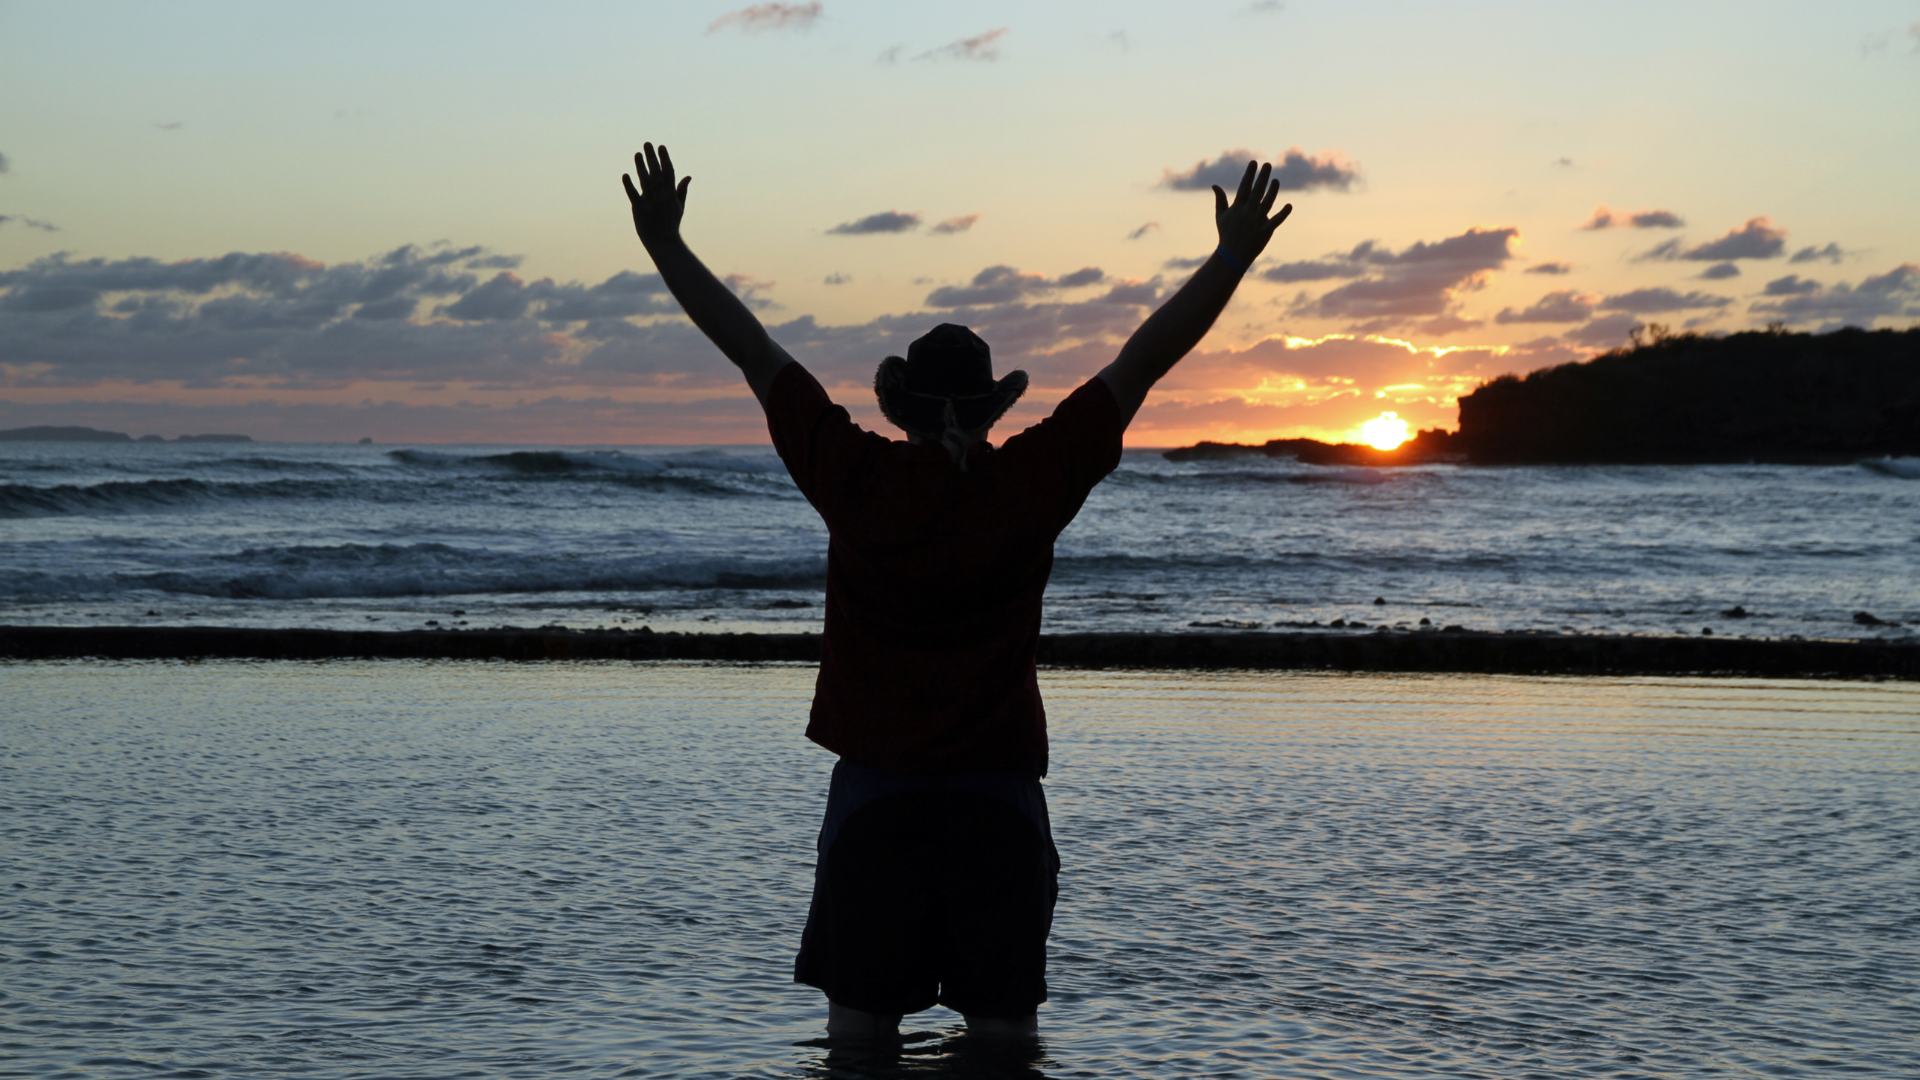 A man stands on a beach with his arms in the air